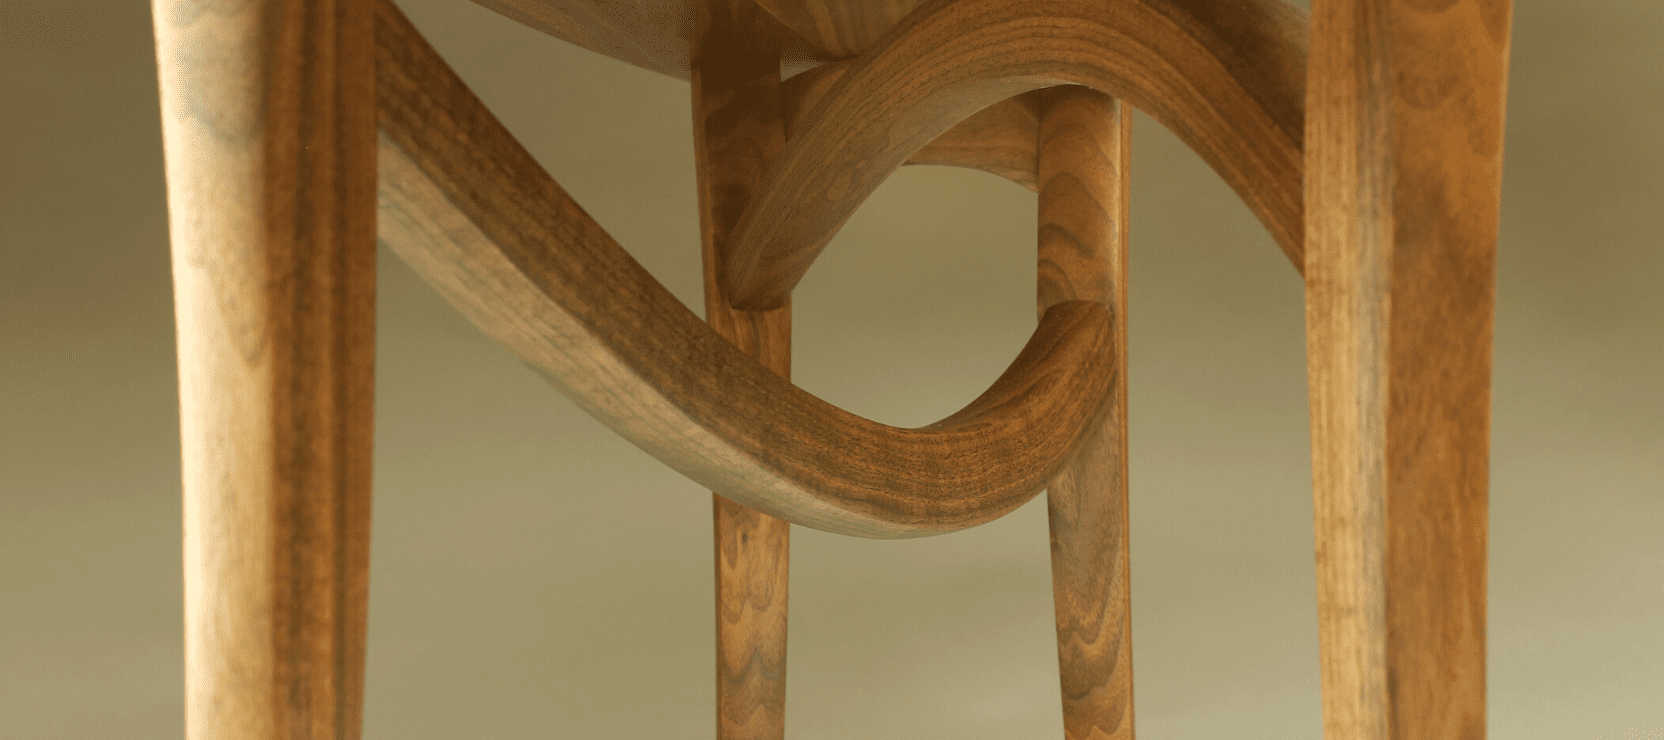 Curved Wooden Legs of Handmade Chair